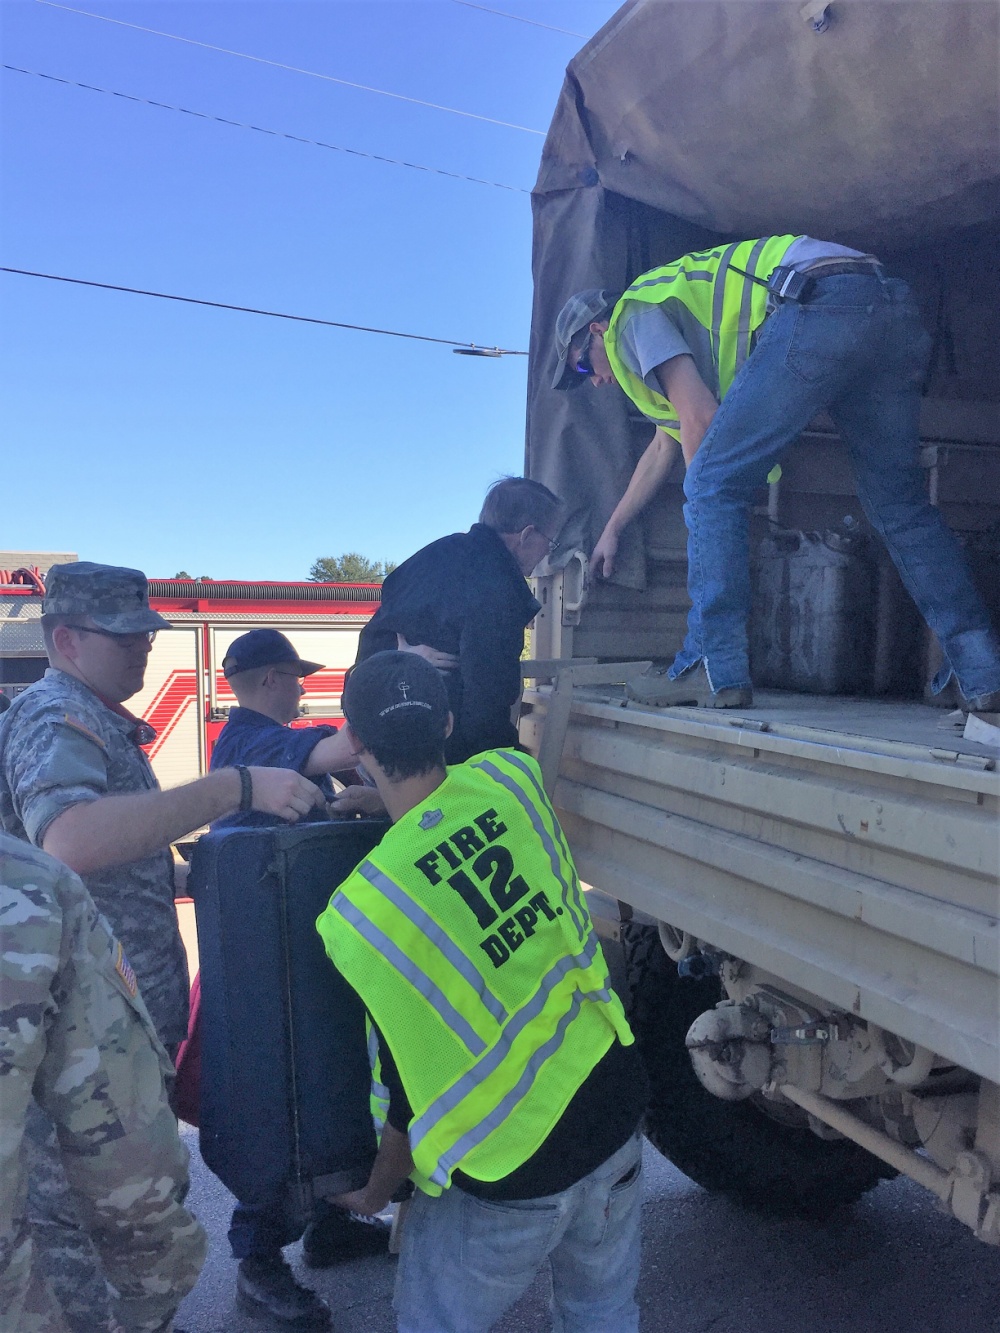 Local fire department rescue workers help flood survivors board a North Carolina Air National Guard 236th Brigade Engineer Battalion M35 2-ton cargo truck in Lumberton, North Carolina, Oct. 10, 2016. The Lumber River flooded the city after Hurricane Matthew. (U.S. Coast Guard photo by Master Chief Petty Officer Louis Coleman/Released)